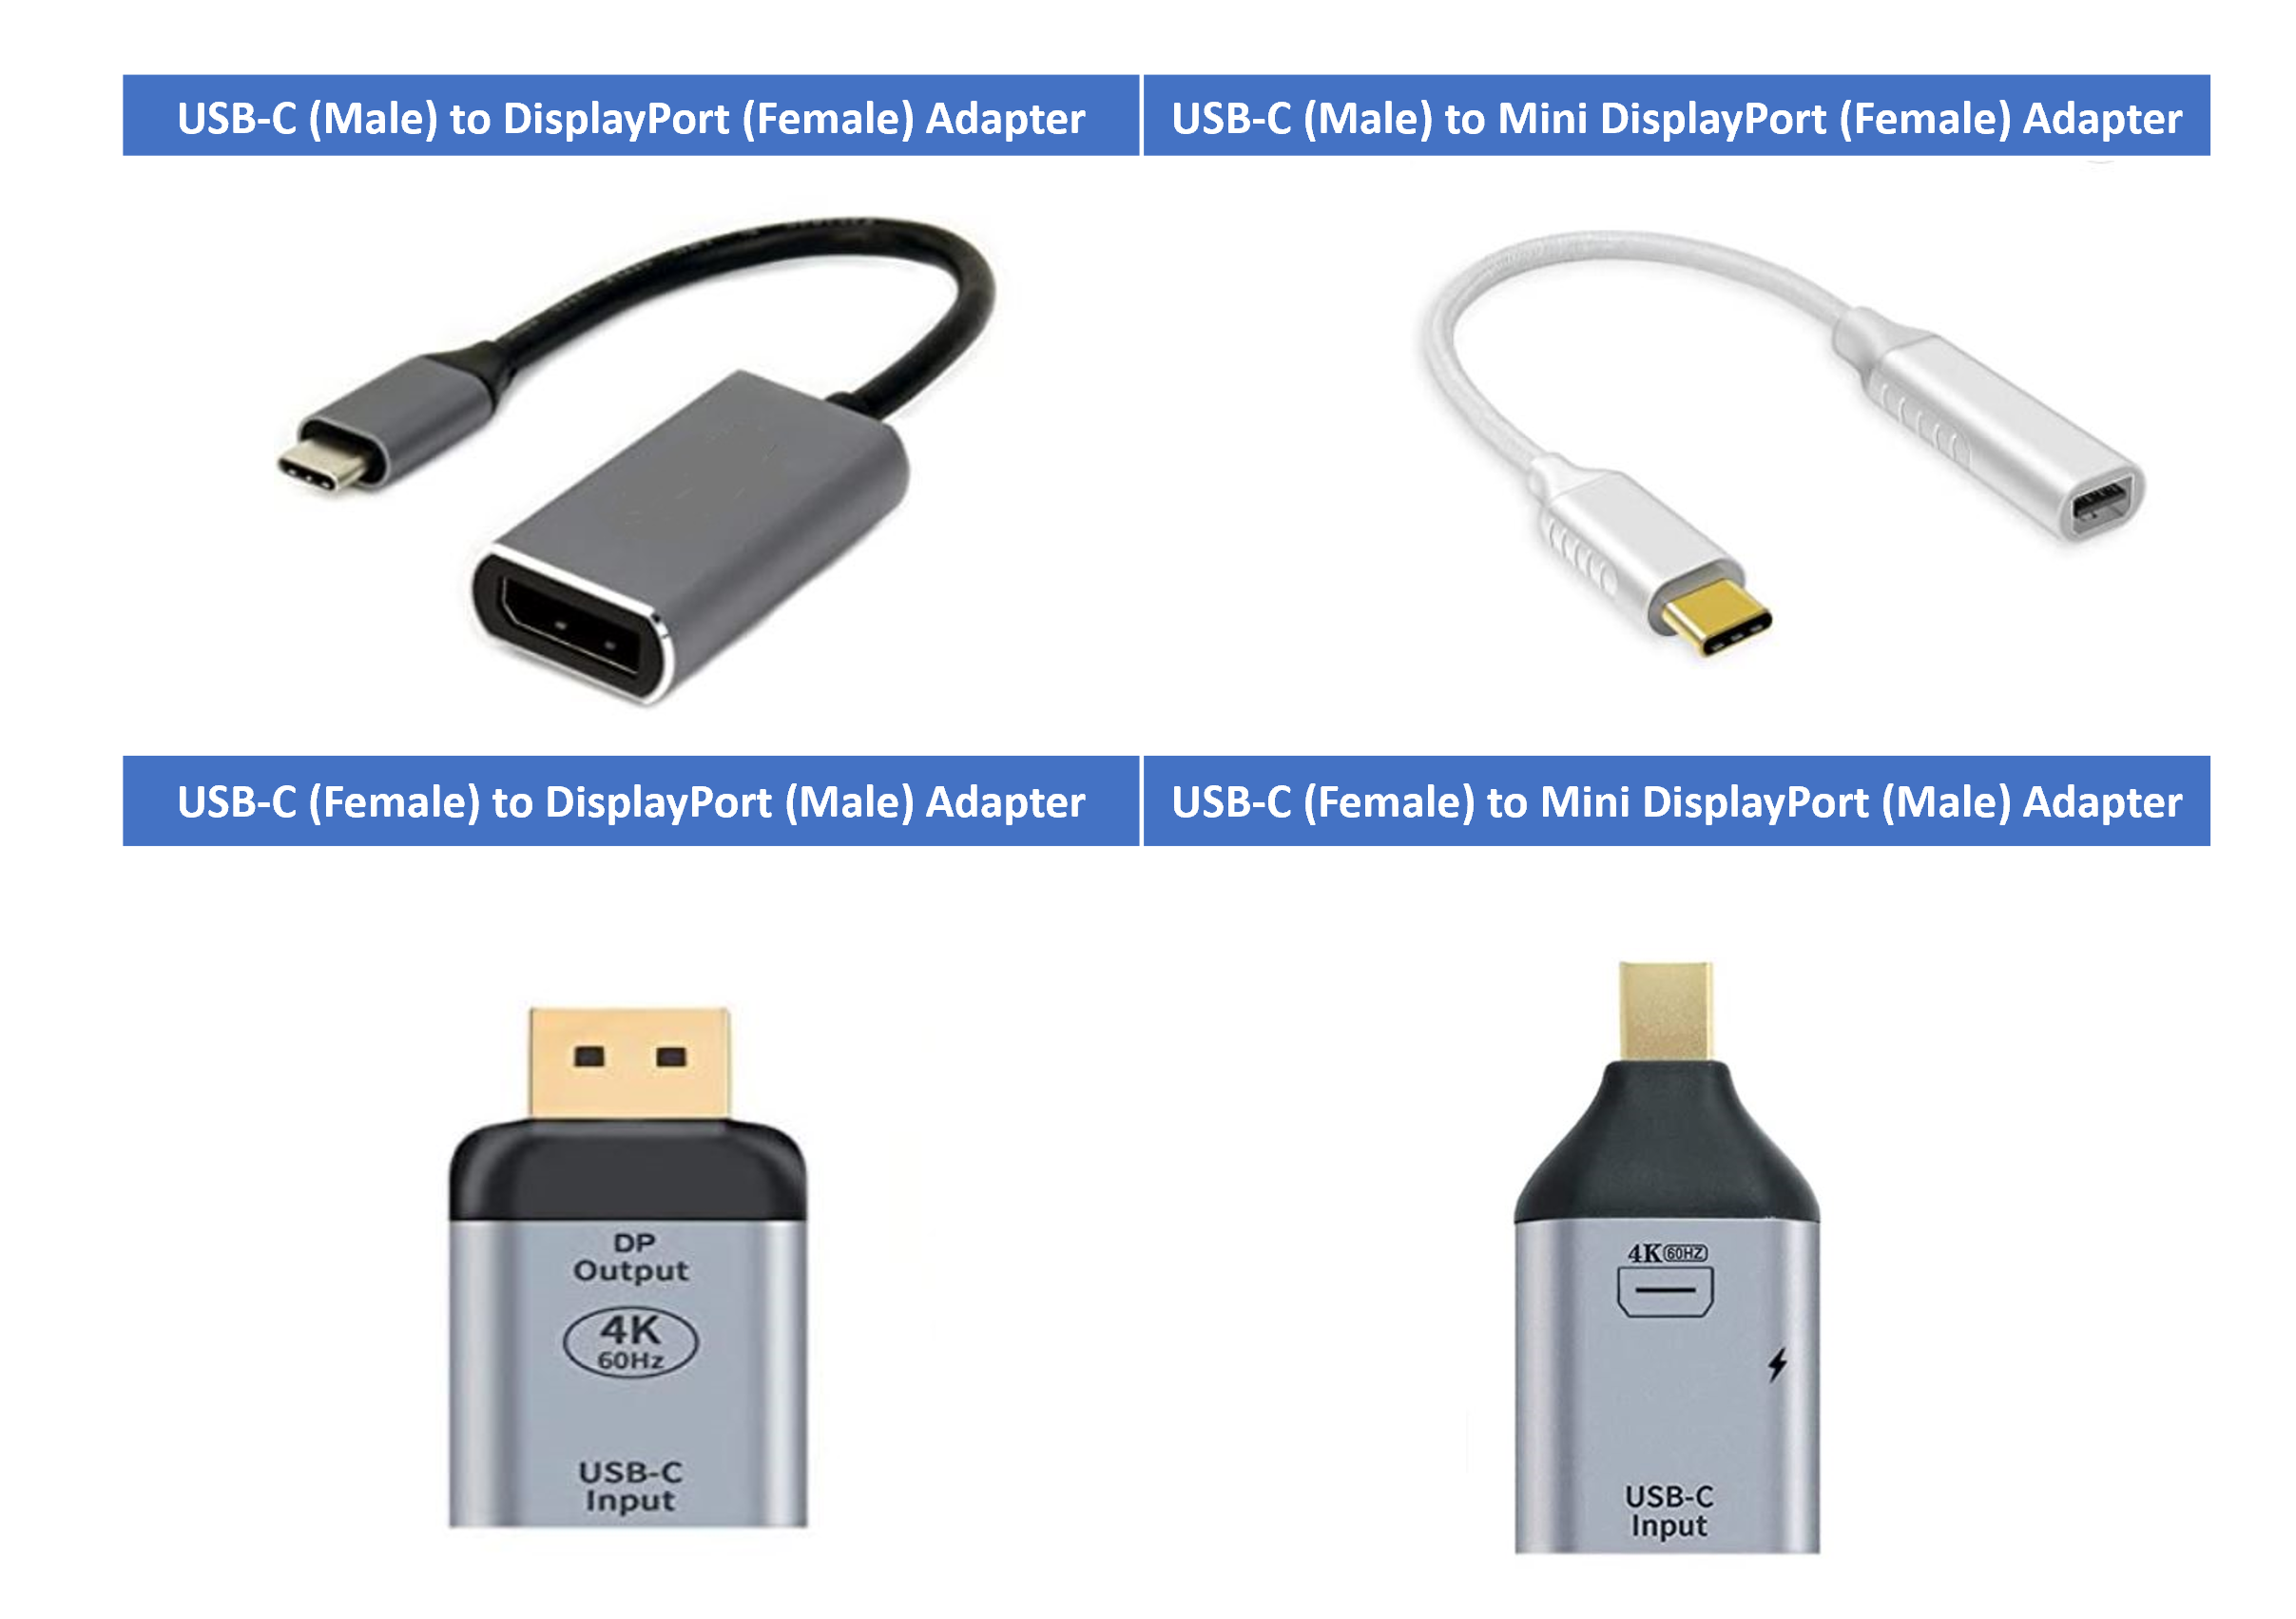 DisplayPort 1.4 vs. 1.2: What's the Difference?